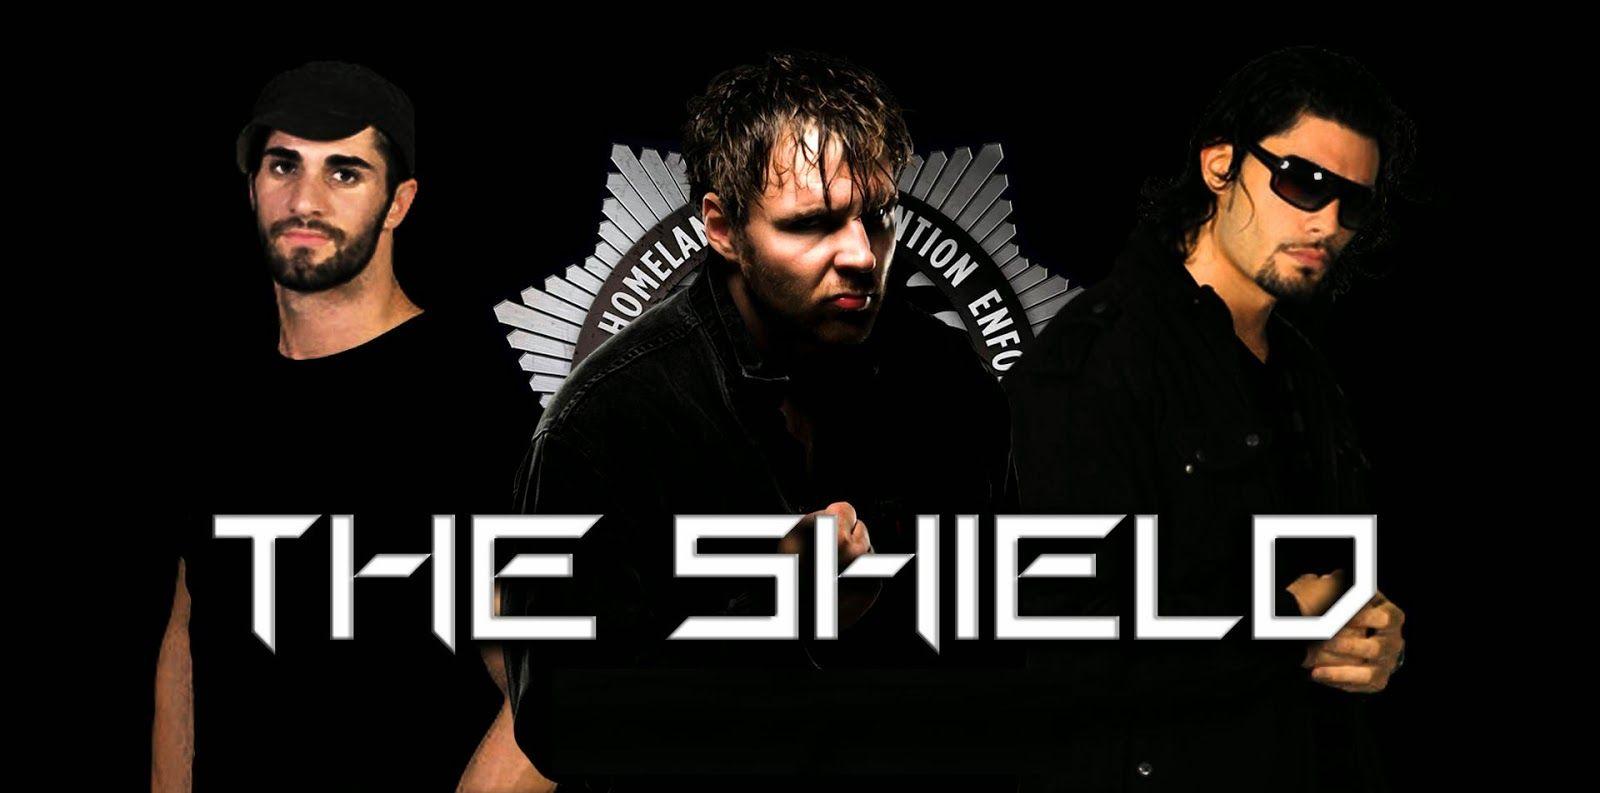 Wwe The Shield Mask Wallpaper Picture Of Mask Jcimages.Org